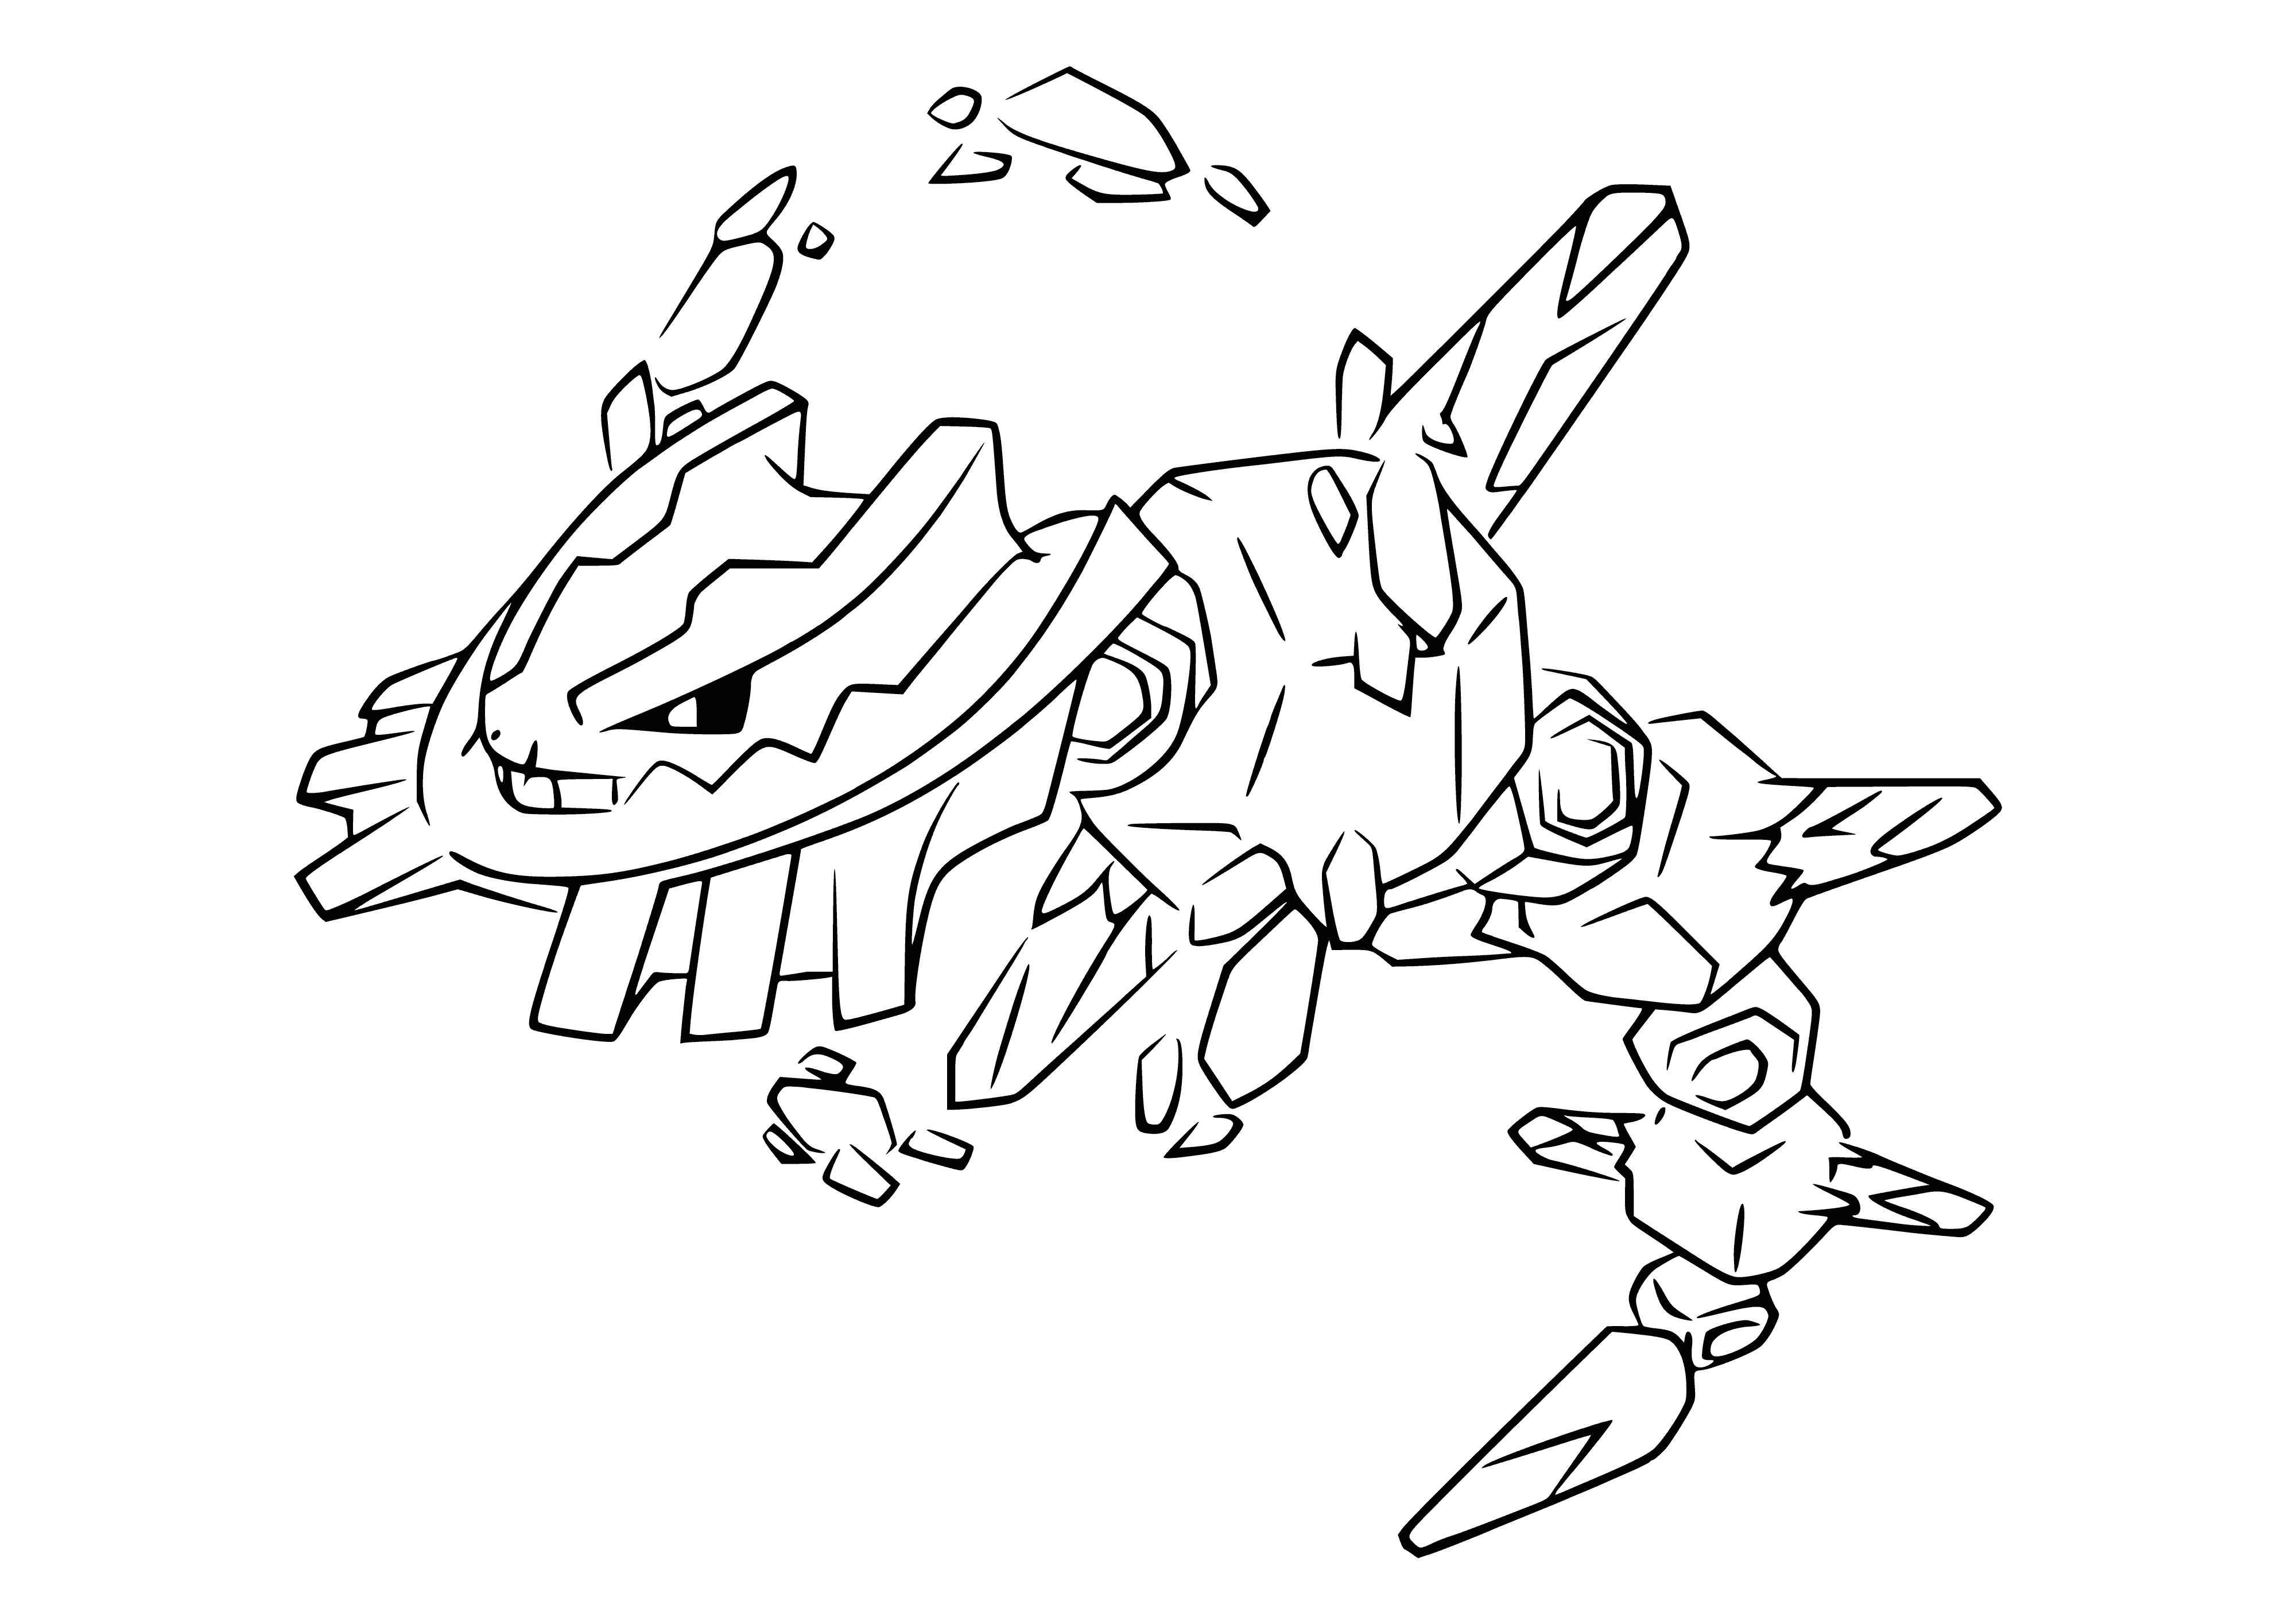 coloring page: Steelix is a Ground/Steel-type Pokemon with a long, thick body, red tail, red armor & white fangs. It weighs over 1 ton & can be found in caves & mountainous areas.